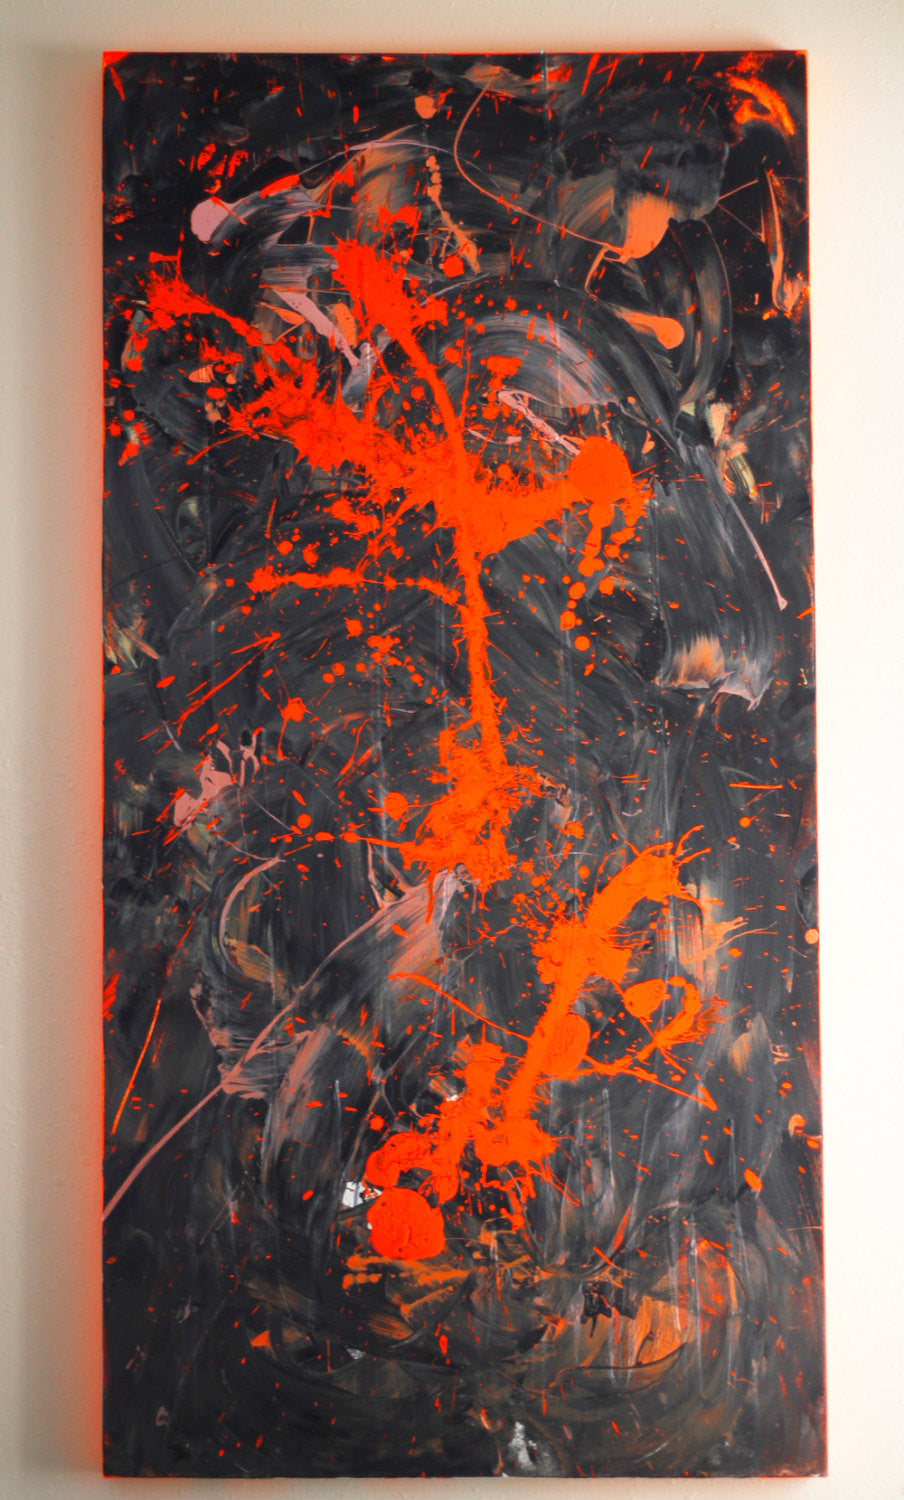 666 - original abstract art painting with black and orange fluorescent colors